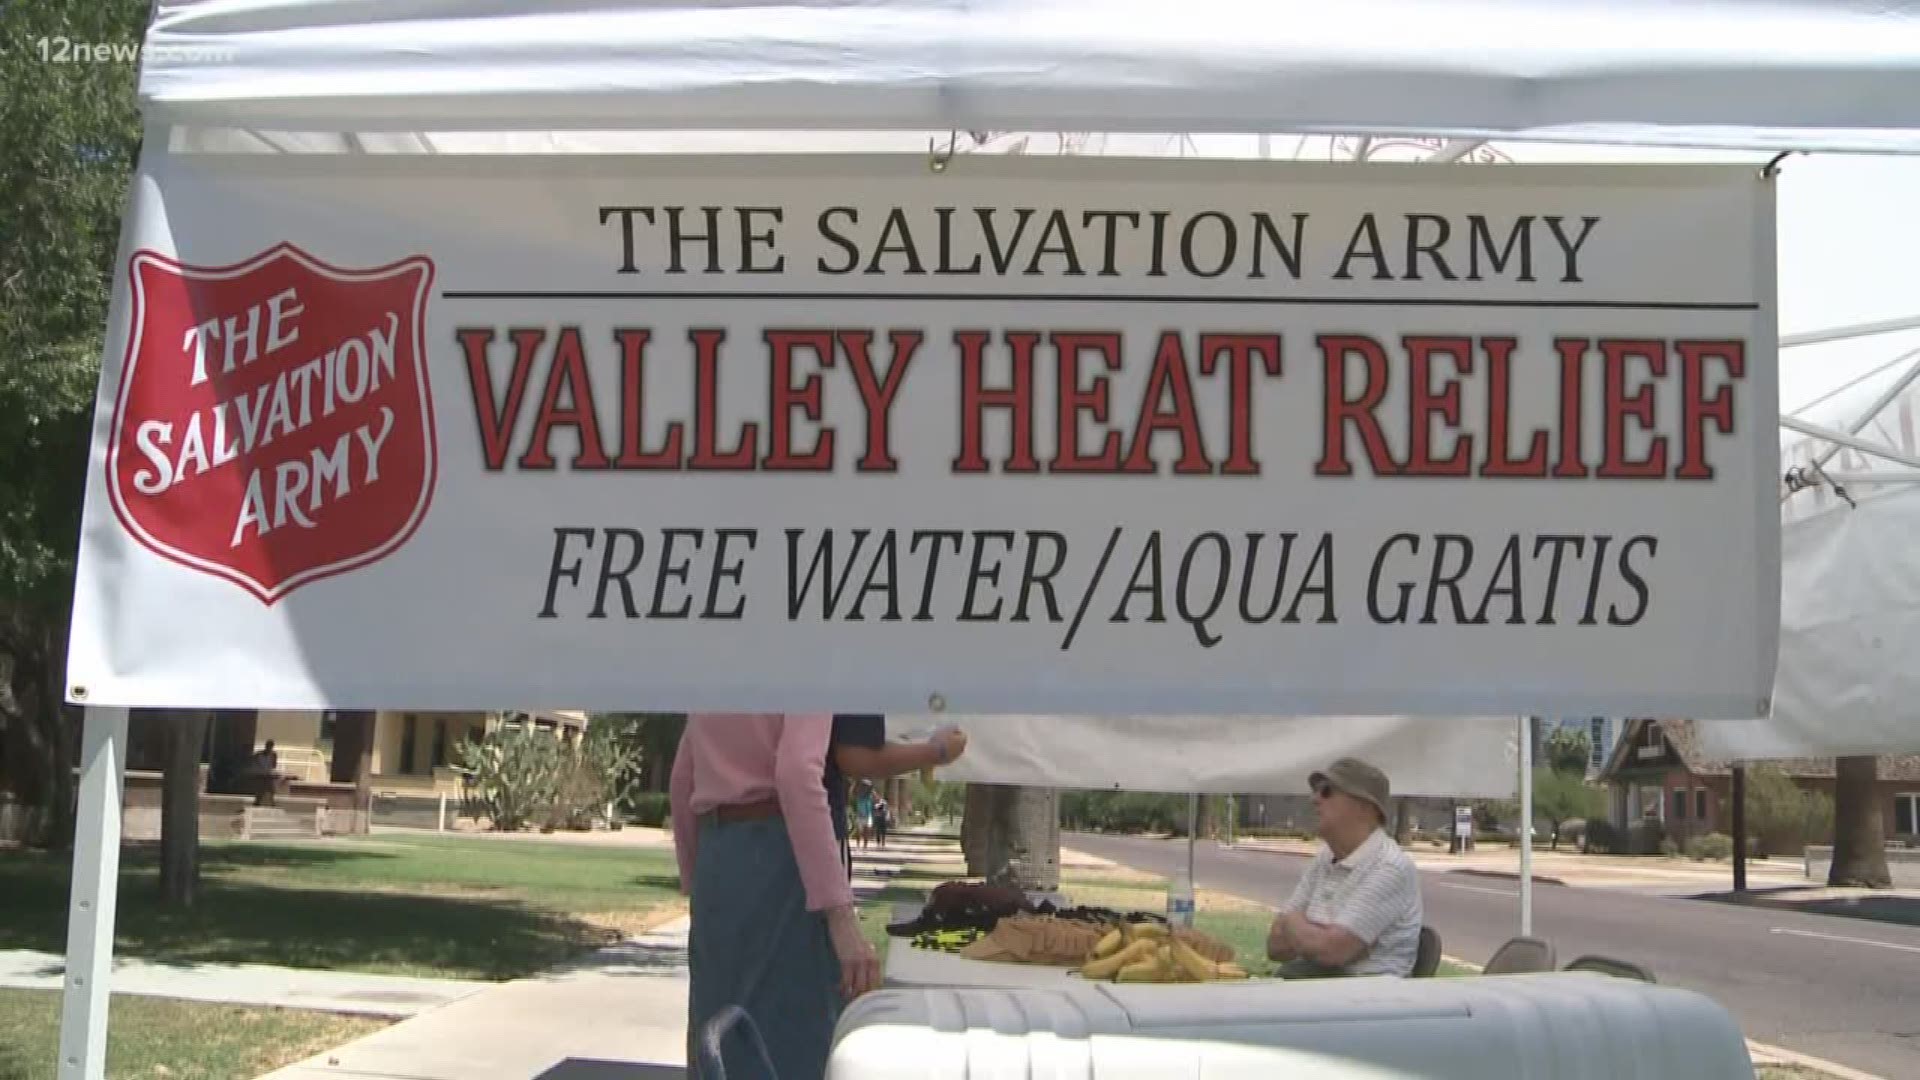 Heat relief stations will be active Tuesday and Wednesday as temperatures around the Phoenix area soar well above 110 degrees. The National Weather Service has issued an excessive heat warning for some of Arizona's largest counties through Wednesday night, including Maricopa County.